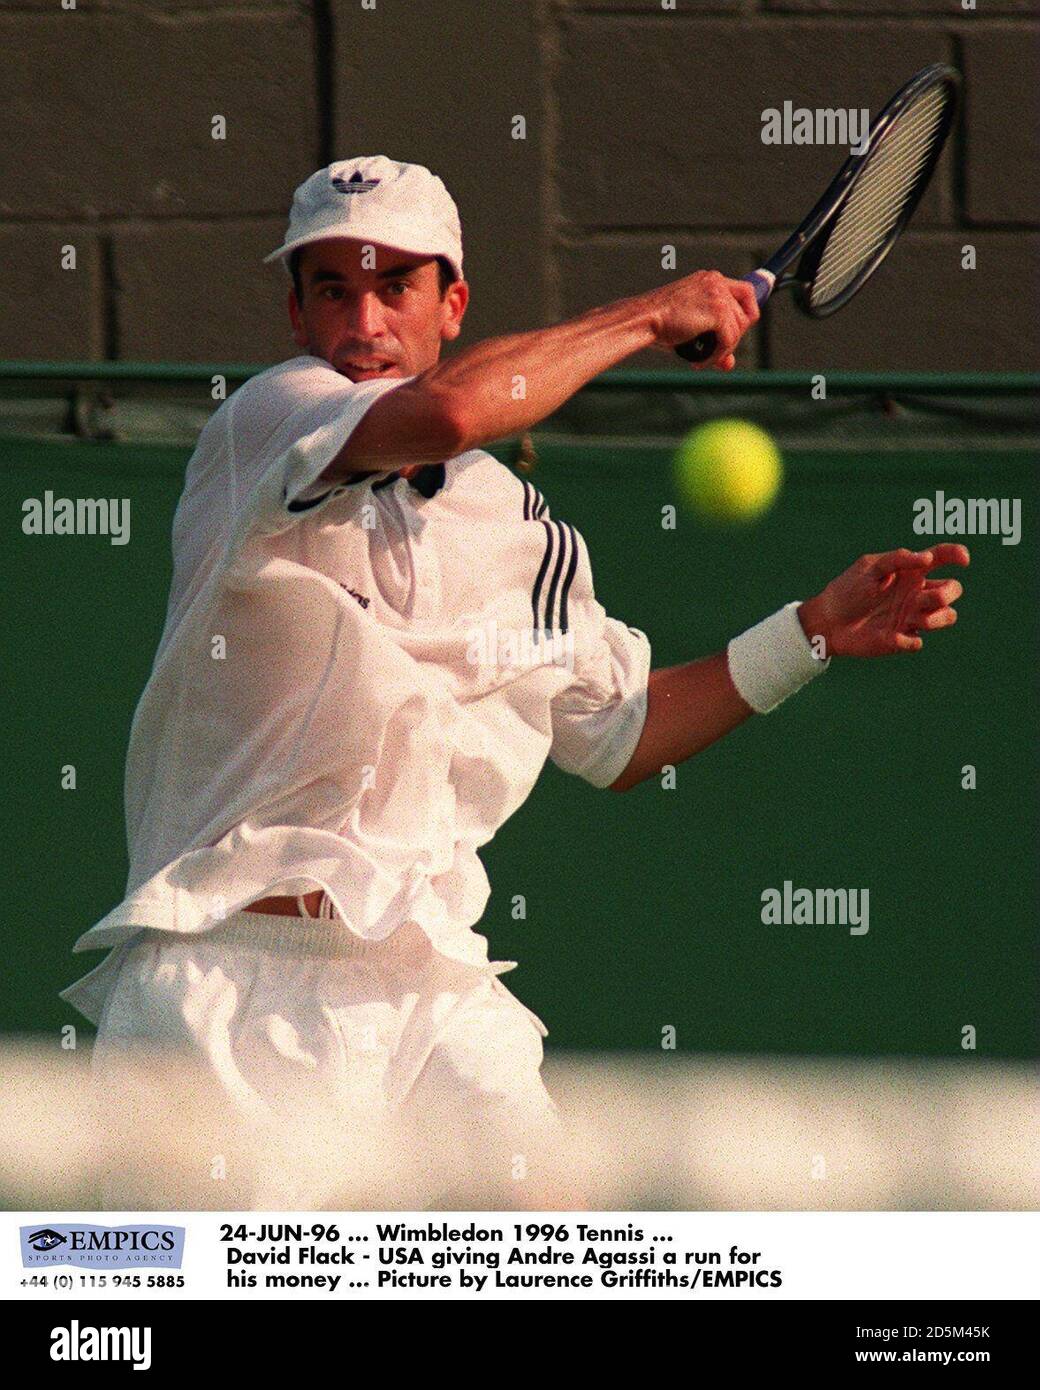 24-JUN-96 ... Wimbledon 1996 Tennis ... Doug Flach (USA) giving Andre Agassi a run for his money ... Picture by Laurence Griffiths/EMPICS Stock Photo